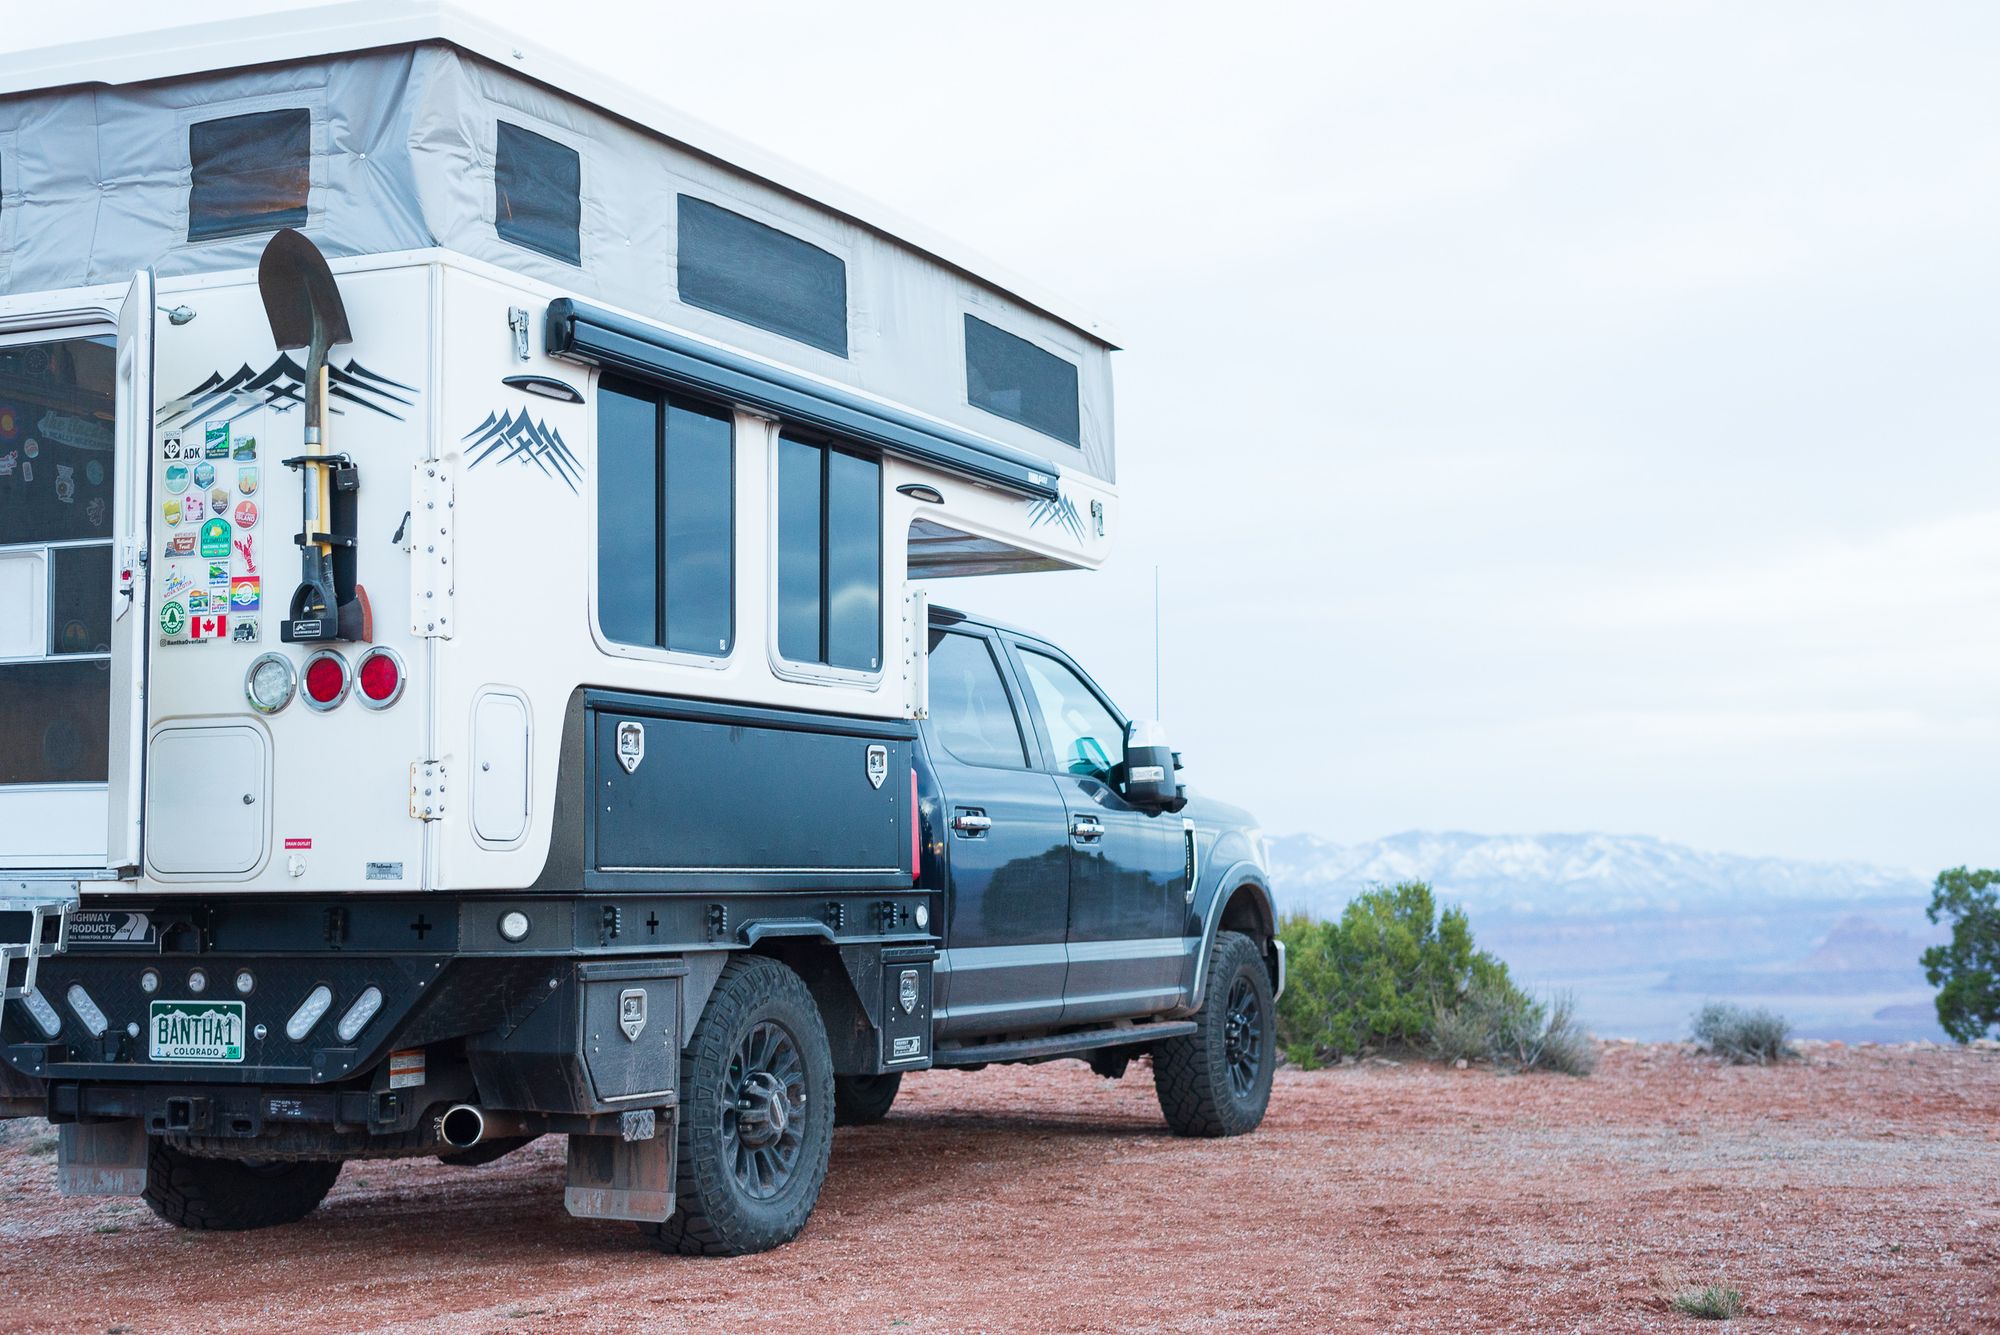 Take A Tour of Our Overlanding Rig "BANTHA1"